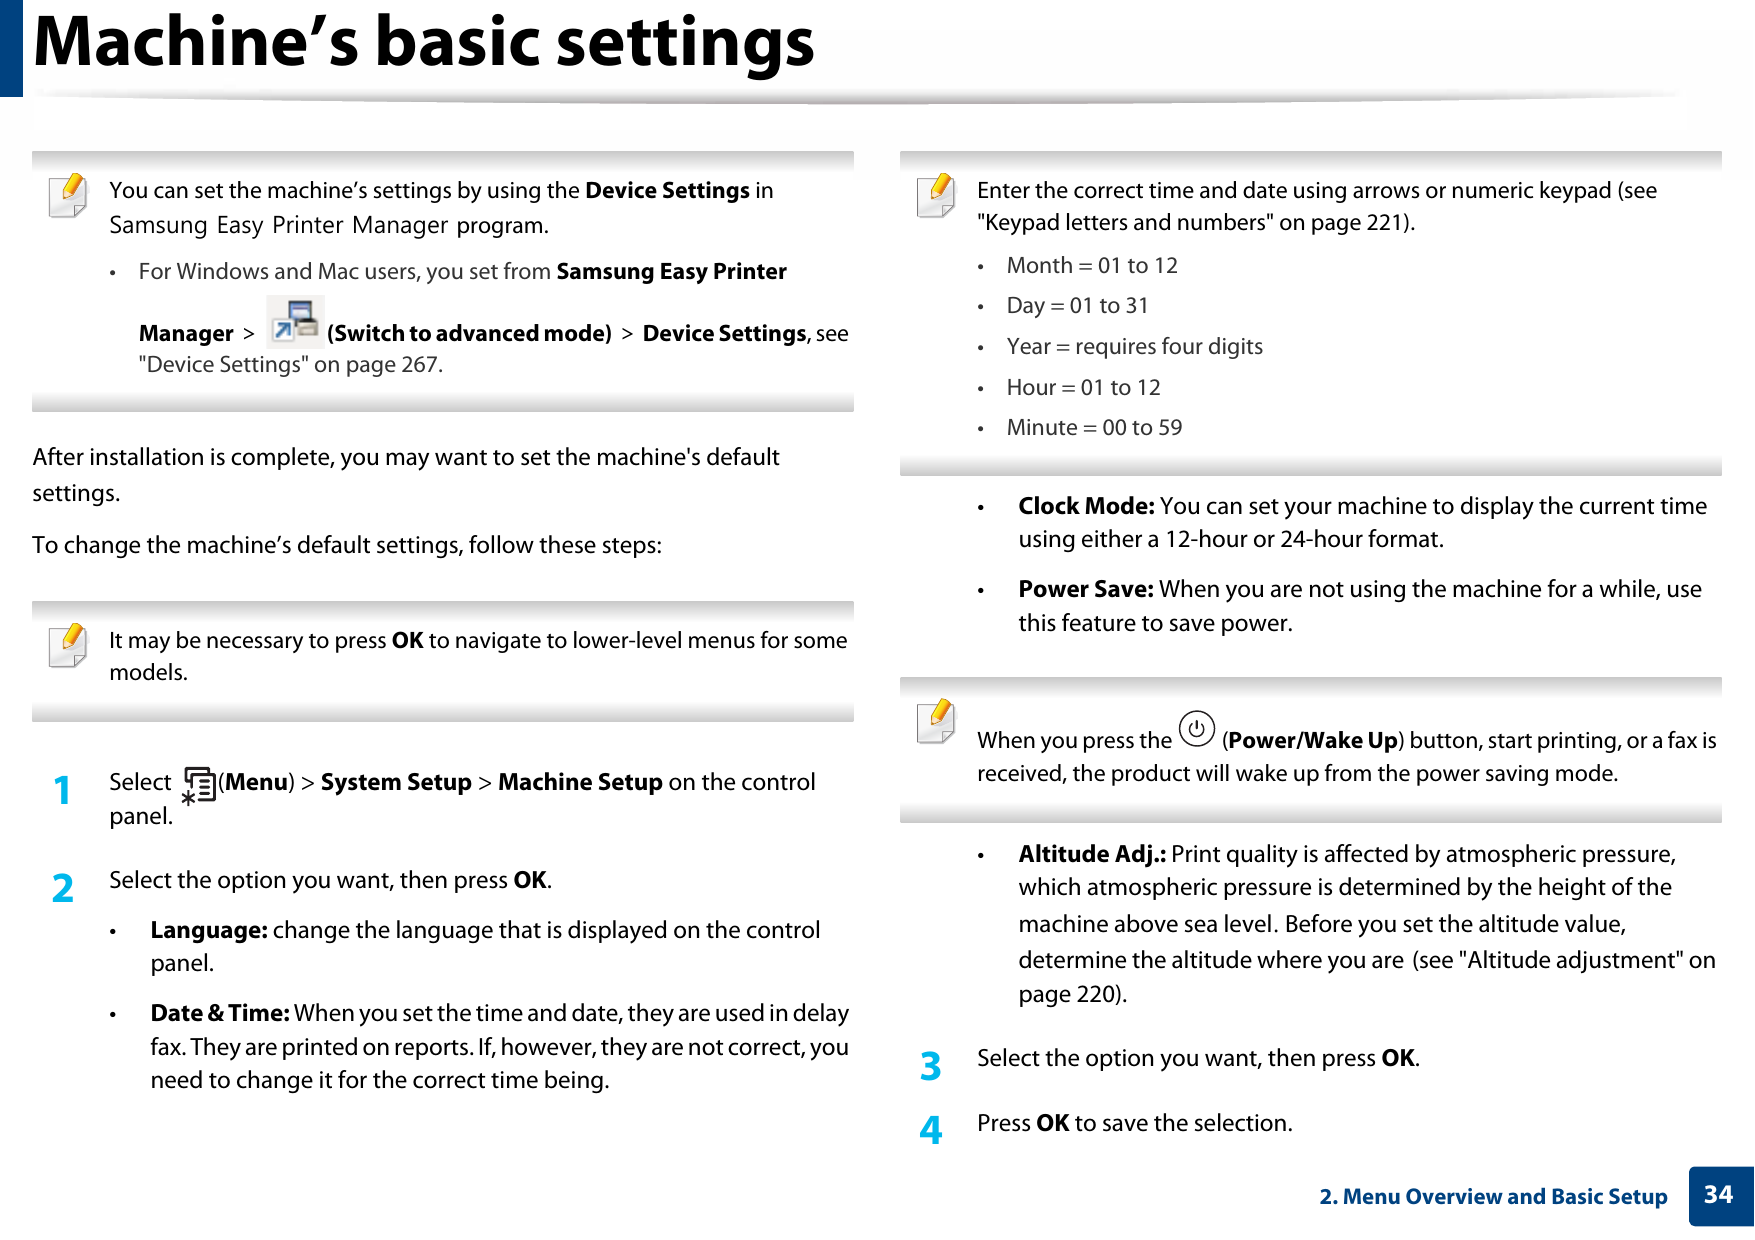 342. Menu Overview and Basic SetupMachine’s basic settings You can set the machine’s settings by using the Device Settings in Samsung Easy Printer Manager program.• For Windows and Mac users, you set from Samsung Easy Printer Manager &gt;  (Switch to advanced mode) &gt; Device Settings, see &quot;Device Settings&quot; on page 267. After installation is complete, you may want to set the machine&apos;s default settings. To change the machine’s default settings, follow these steps: It may be necessary to press OK to navigate to lower-level menus for some models. 1Select (Menu) &gt; System Setup &gt; Machine Setup on the control panel.2  Select the option you want, then press OK.•Language: change the language that is displayed on the control panel.•Date &amp; Time: When you set the time and date, they are used in delay fax. They are printed on reports. If, however, they are not correct, you need to change it for the correct time being. Enter the correct time and date using arrows or numeric keypad (see &quot;Keypad letters and numbers&quot; on page 221).• Month = 01 to 12• Day = 01 to 31• Year = requires four digits• Hour = 01 to 12• Minute = 00 to 59 •Clock Mode: You can set your machine to display the current time using either a 12-hour or 24-hour format.•Power Save: When you are not using the machine for a while, use this feature to save power. When you press the   (Power/Wake Up) button, start printing, or a fax is received, the product will wake up from the power saving mode. •Altitude Adj.: Print quality is affected by atmospheric pressure, which atmospheric pressure is determined by the height of the machine above sea level. Before you set the altitude value, determine the altitude where you are (see &quot;Altitude adjustment&quot; on page 220).3  Select the option you want, then press OK.4  Press OK to save the selection.